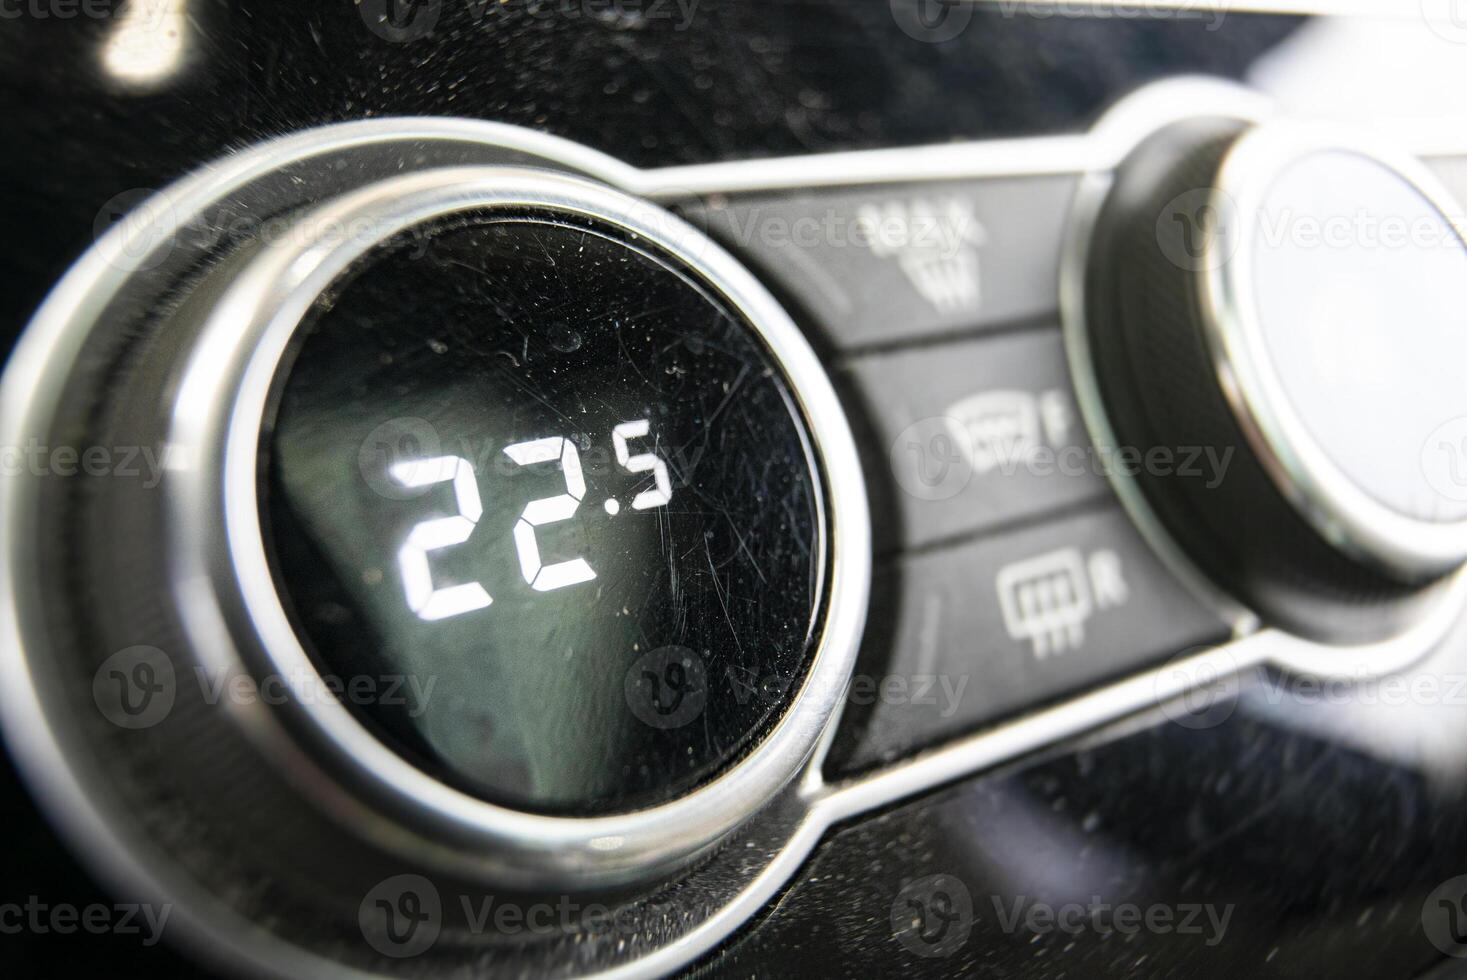 Climate control and car ventilation 2 photo